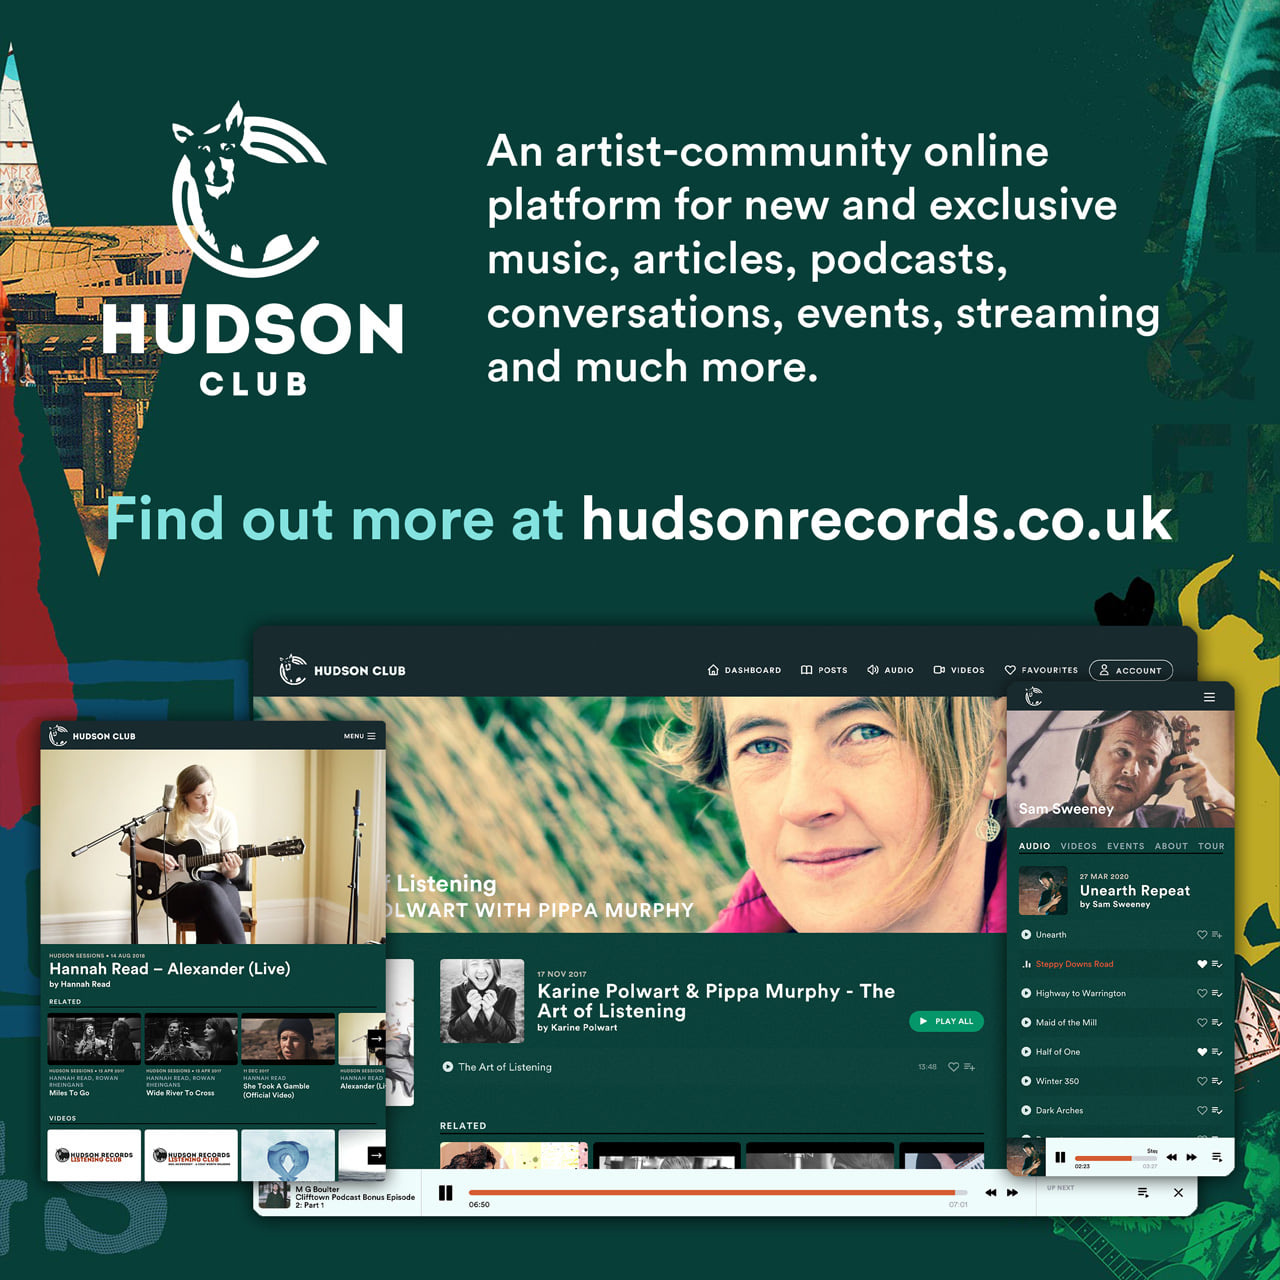 May be an image of 5 people, screen and text that says "An artist-community online platform for new and exclusive music, articles, podcasts, conversations, events, streaming and much more. HUDSON CLUB Find out more at hudsonrecords.co.uk HUDSON CLUB HUDSONCLUB ACCOUNT Hannah Read Alexander (Live) Listening LWART WITH PIPPA MURPHY SamSweeney Repeat Karine Ûort& Pippa Murphy The L ©ThAListening OLPRPECO IPEN"